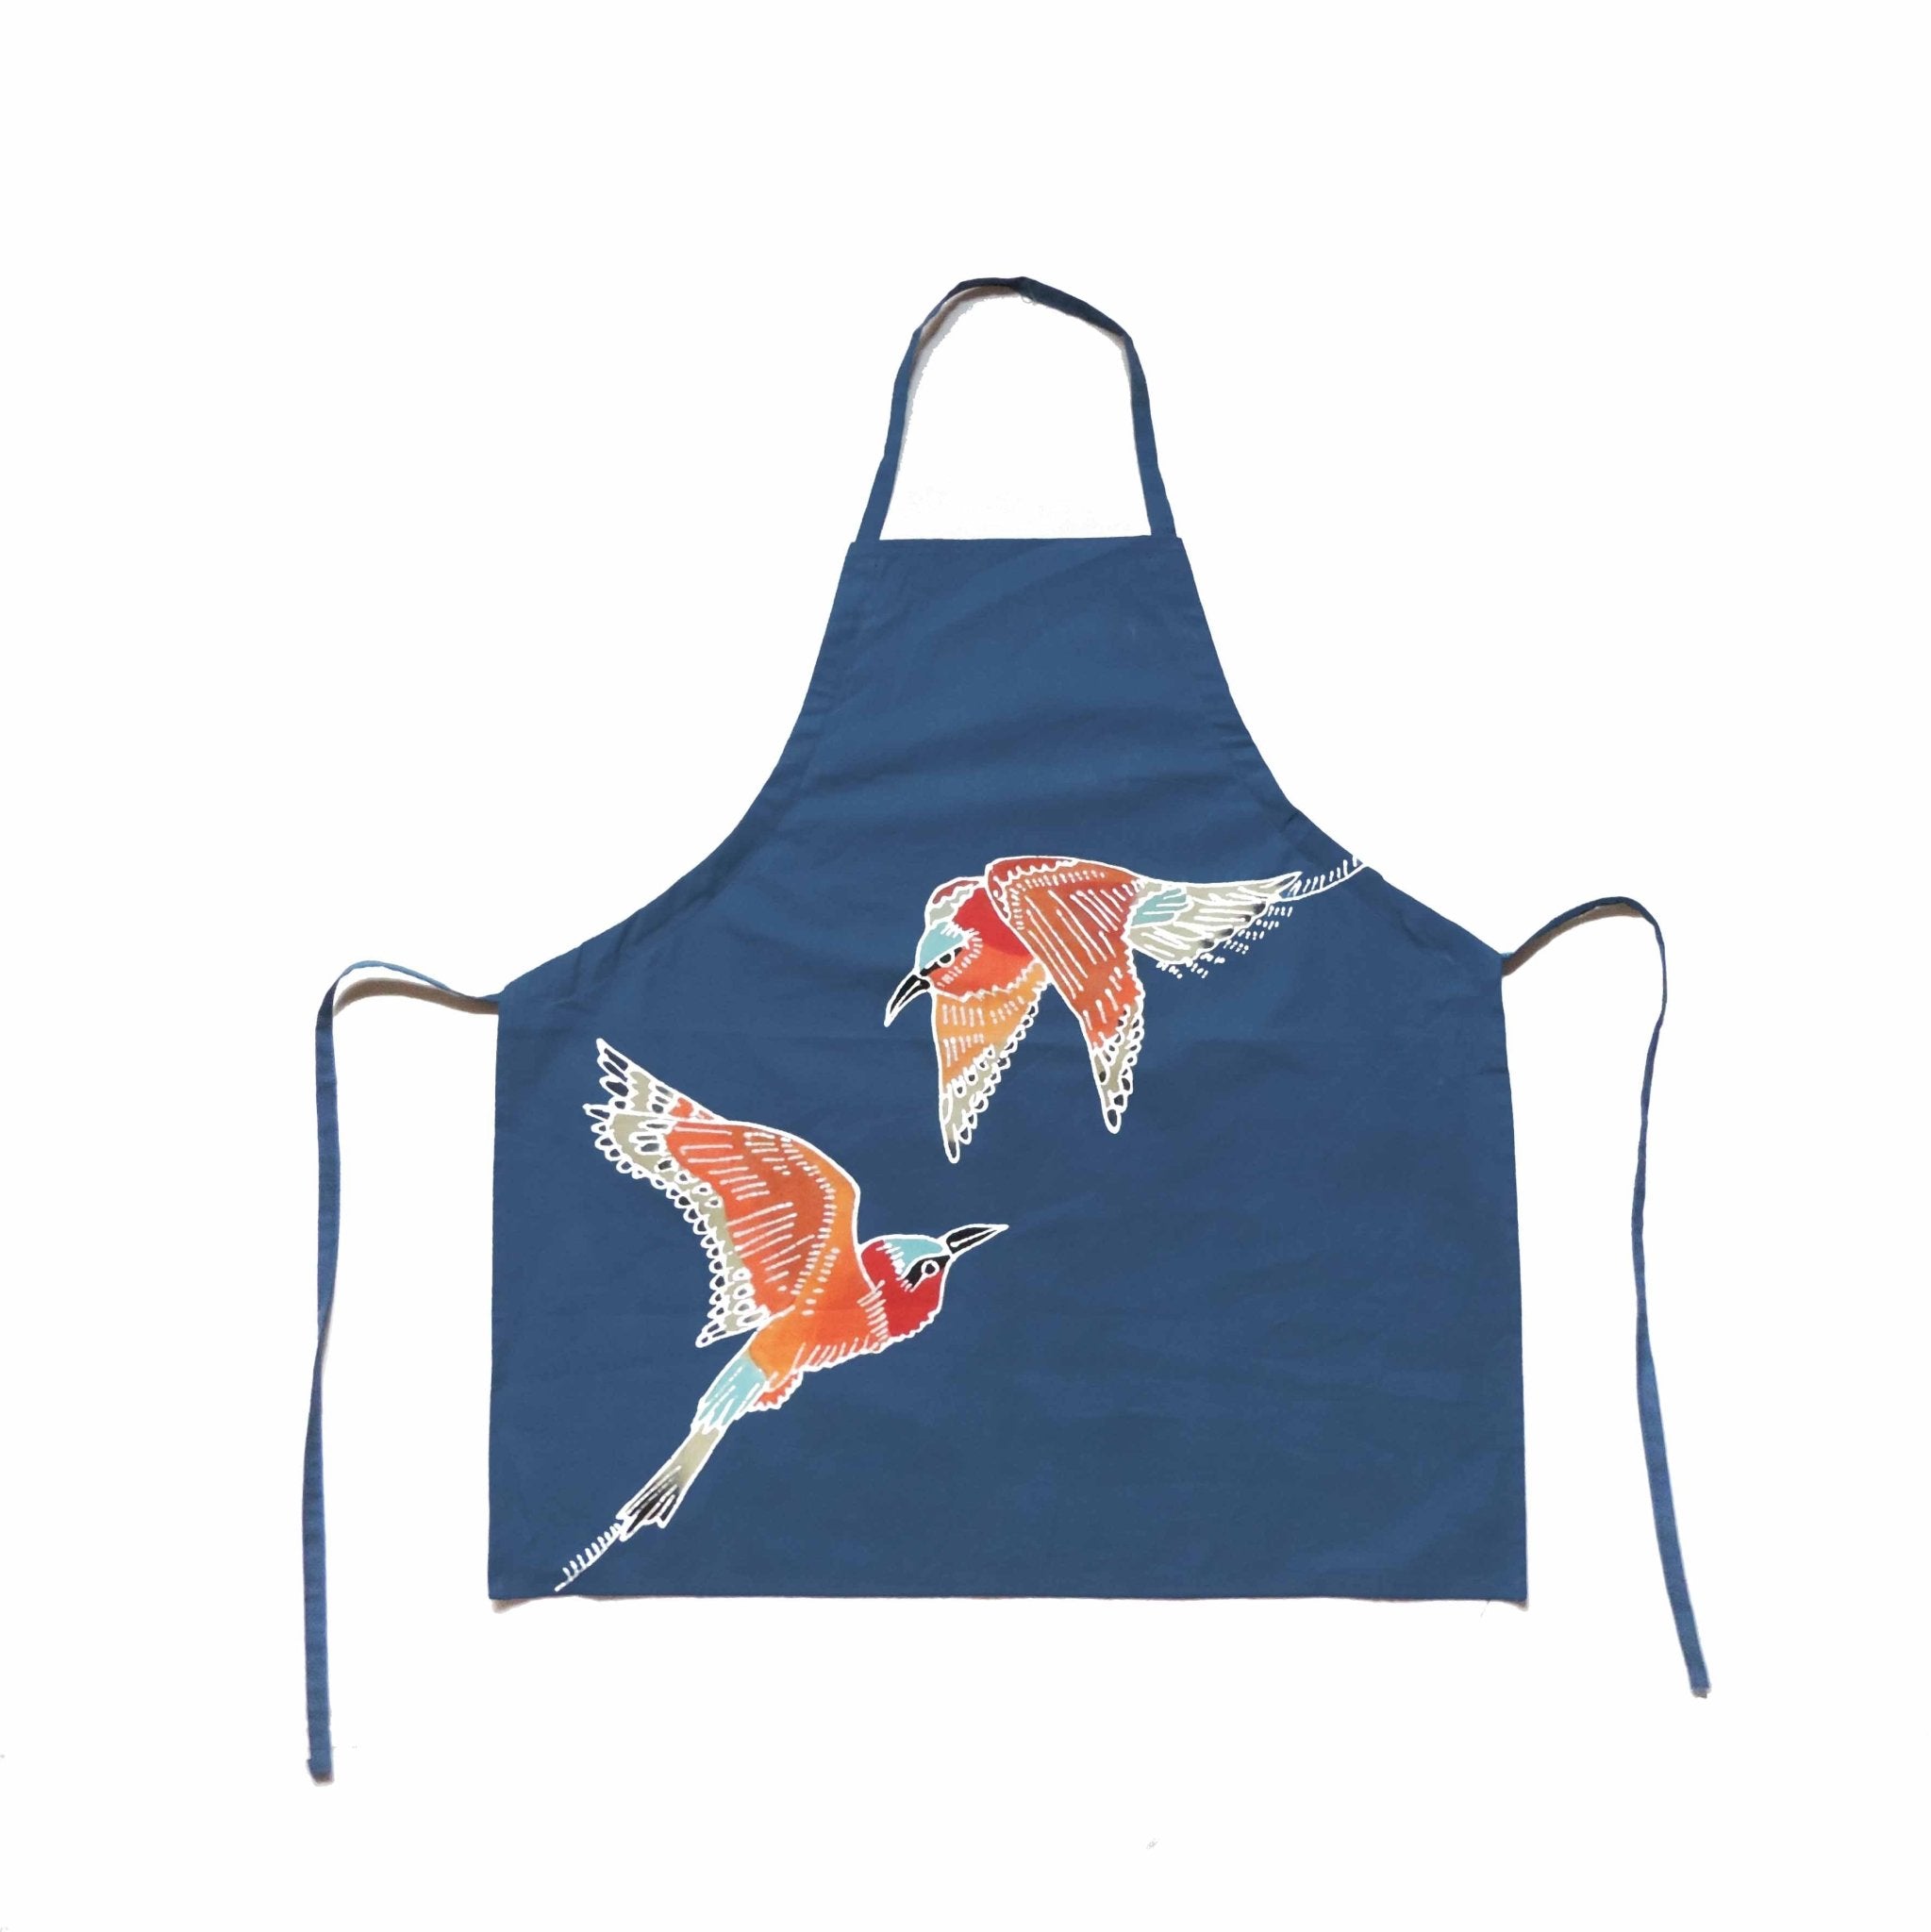 The perfect blue apron for bird lovers with our special Bee eater print!